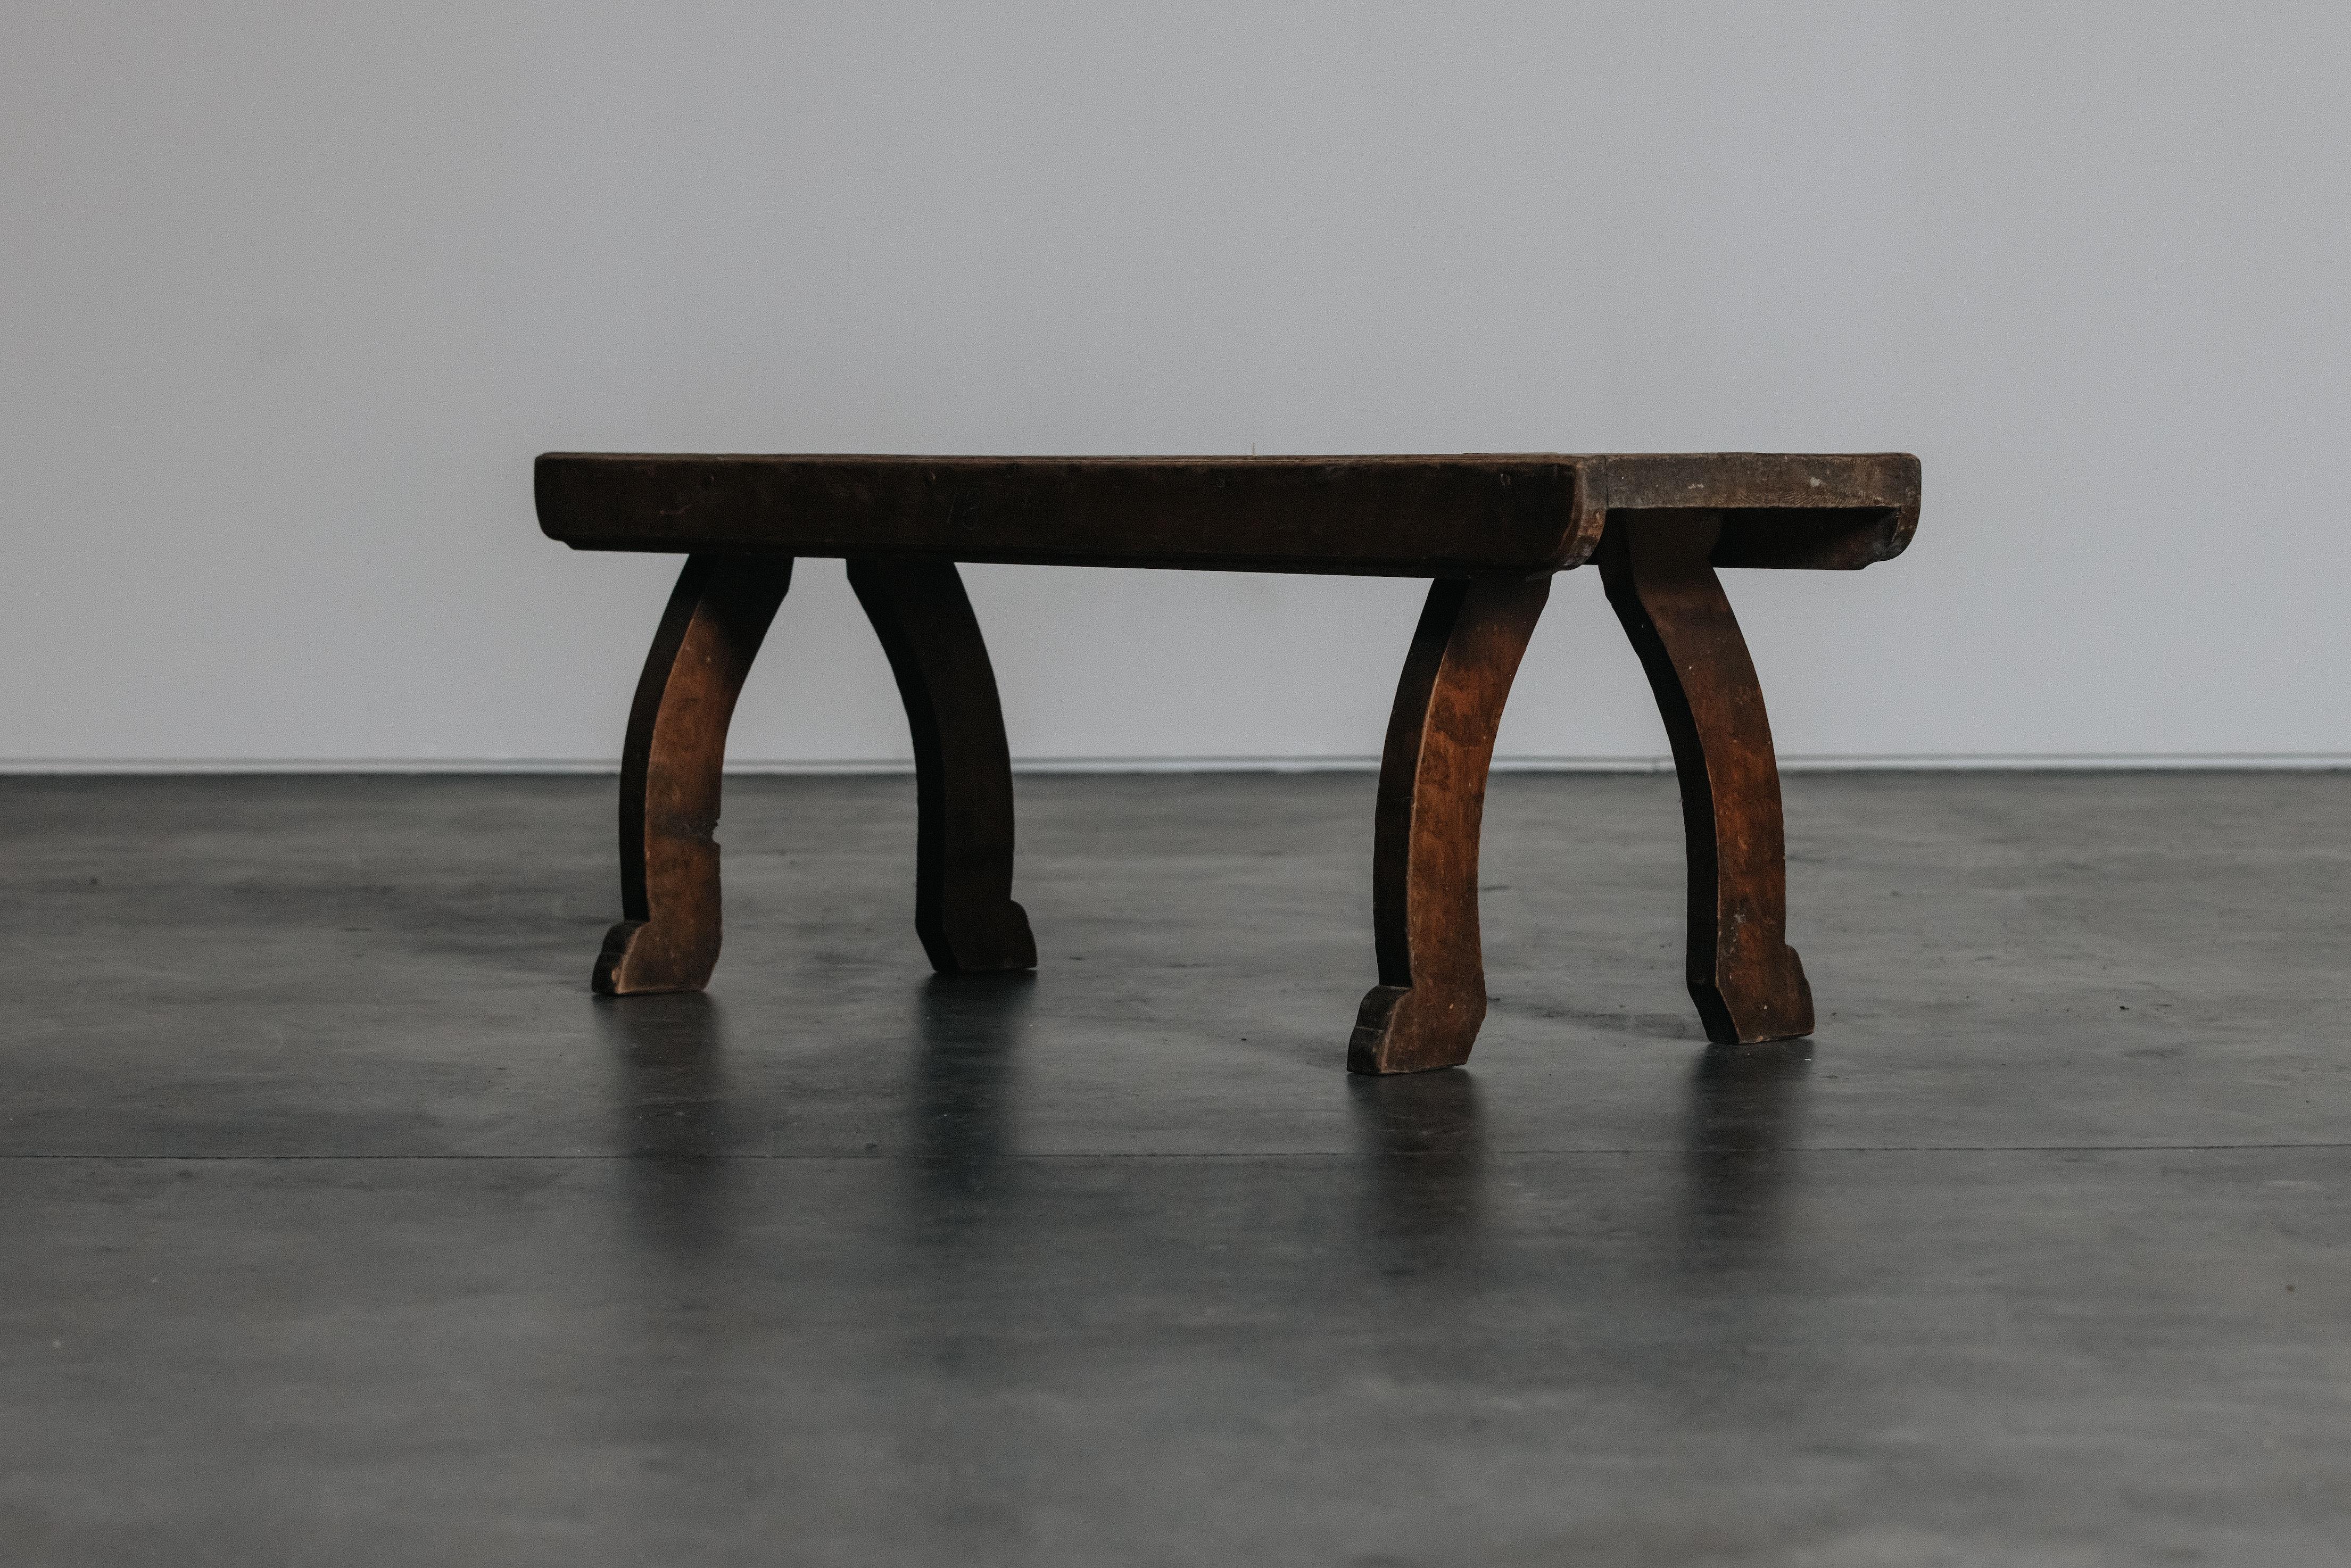 European Primitive Pine Bench From Sweden, Circa 1850 For Sale